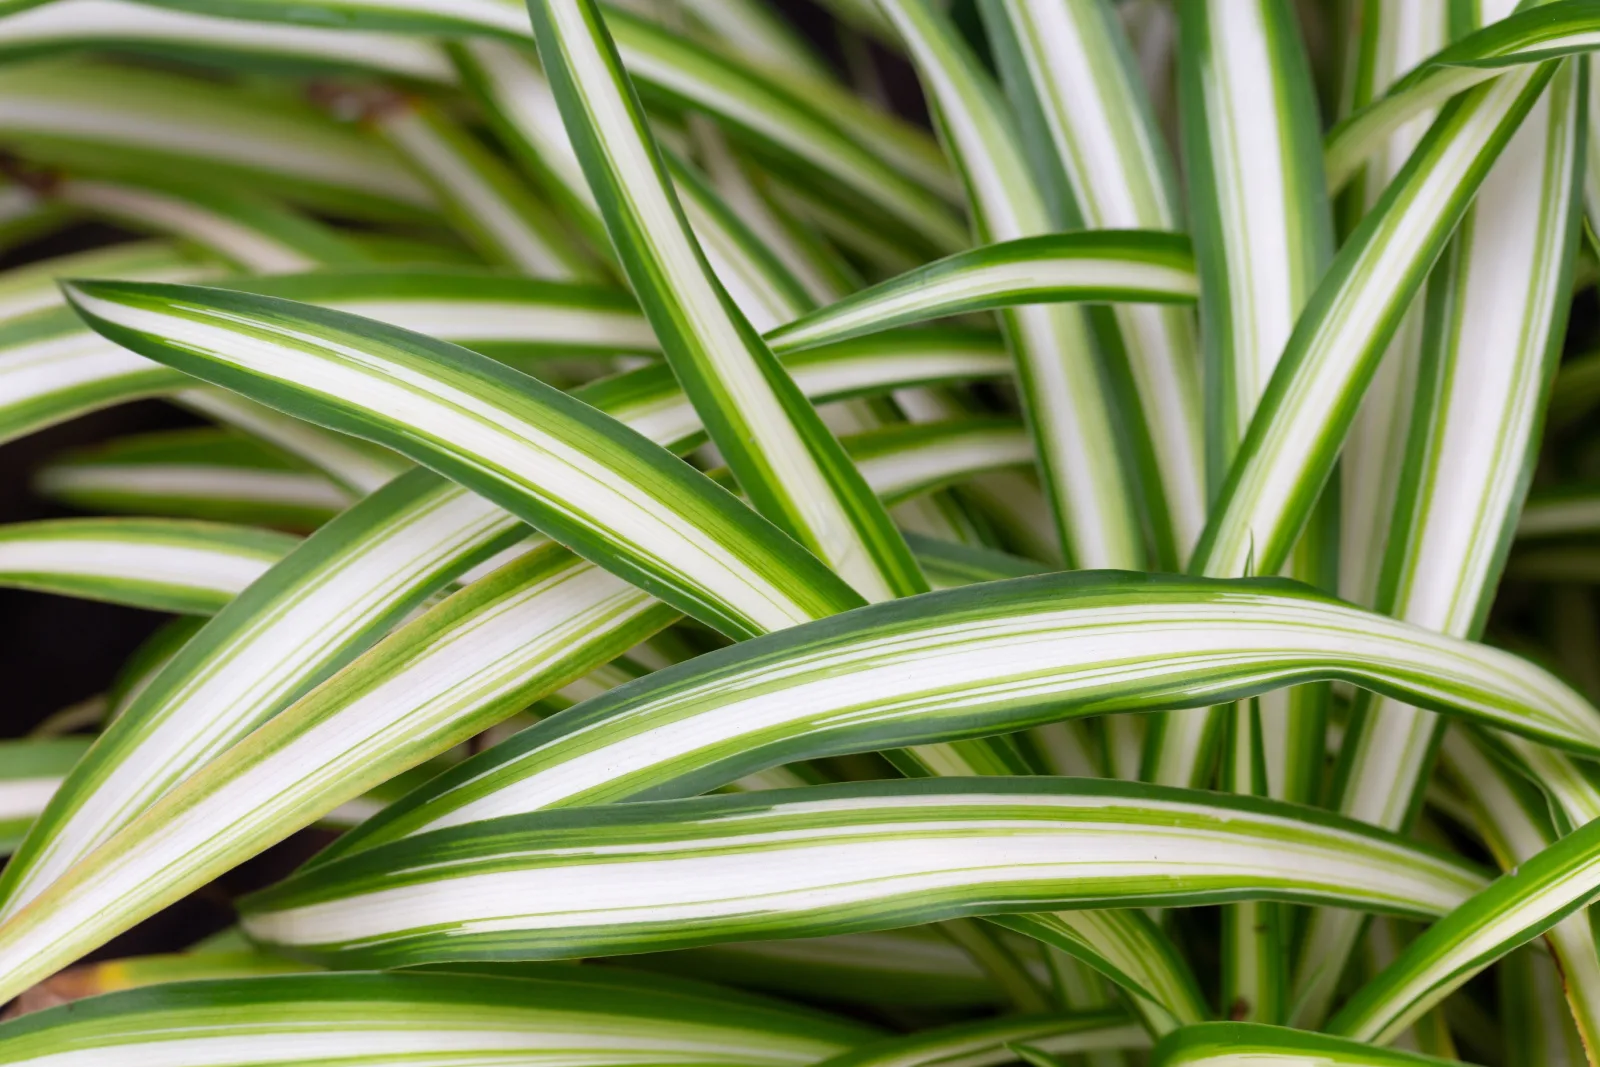 Close-up showing the details of the spider plant leaves